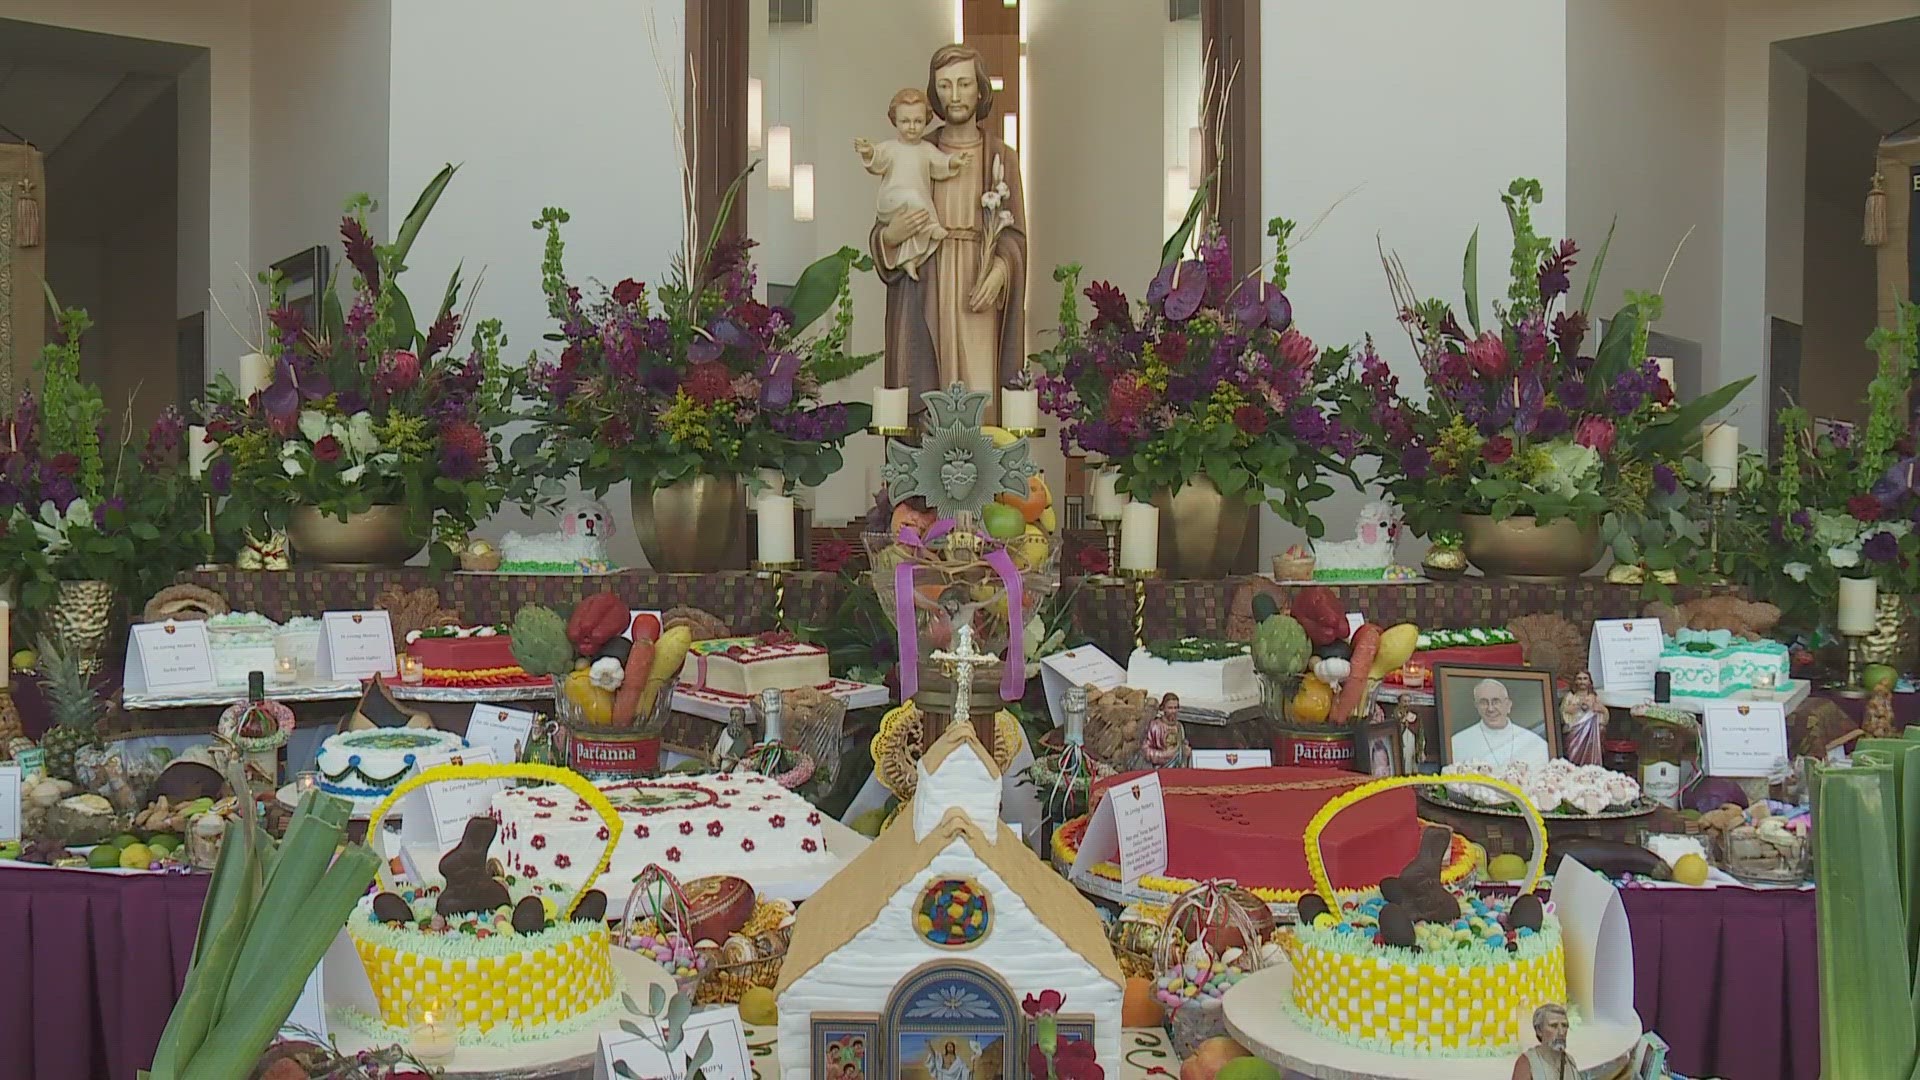 For the St. Joseph's Day feast churches and people across the New Orleans area celebrate by decorating altars.